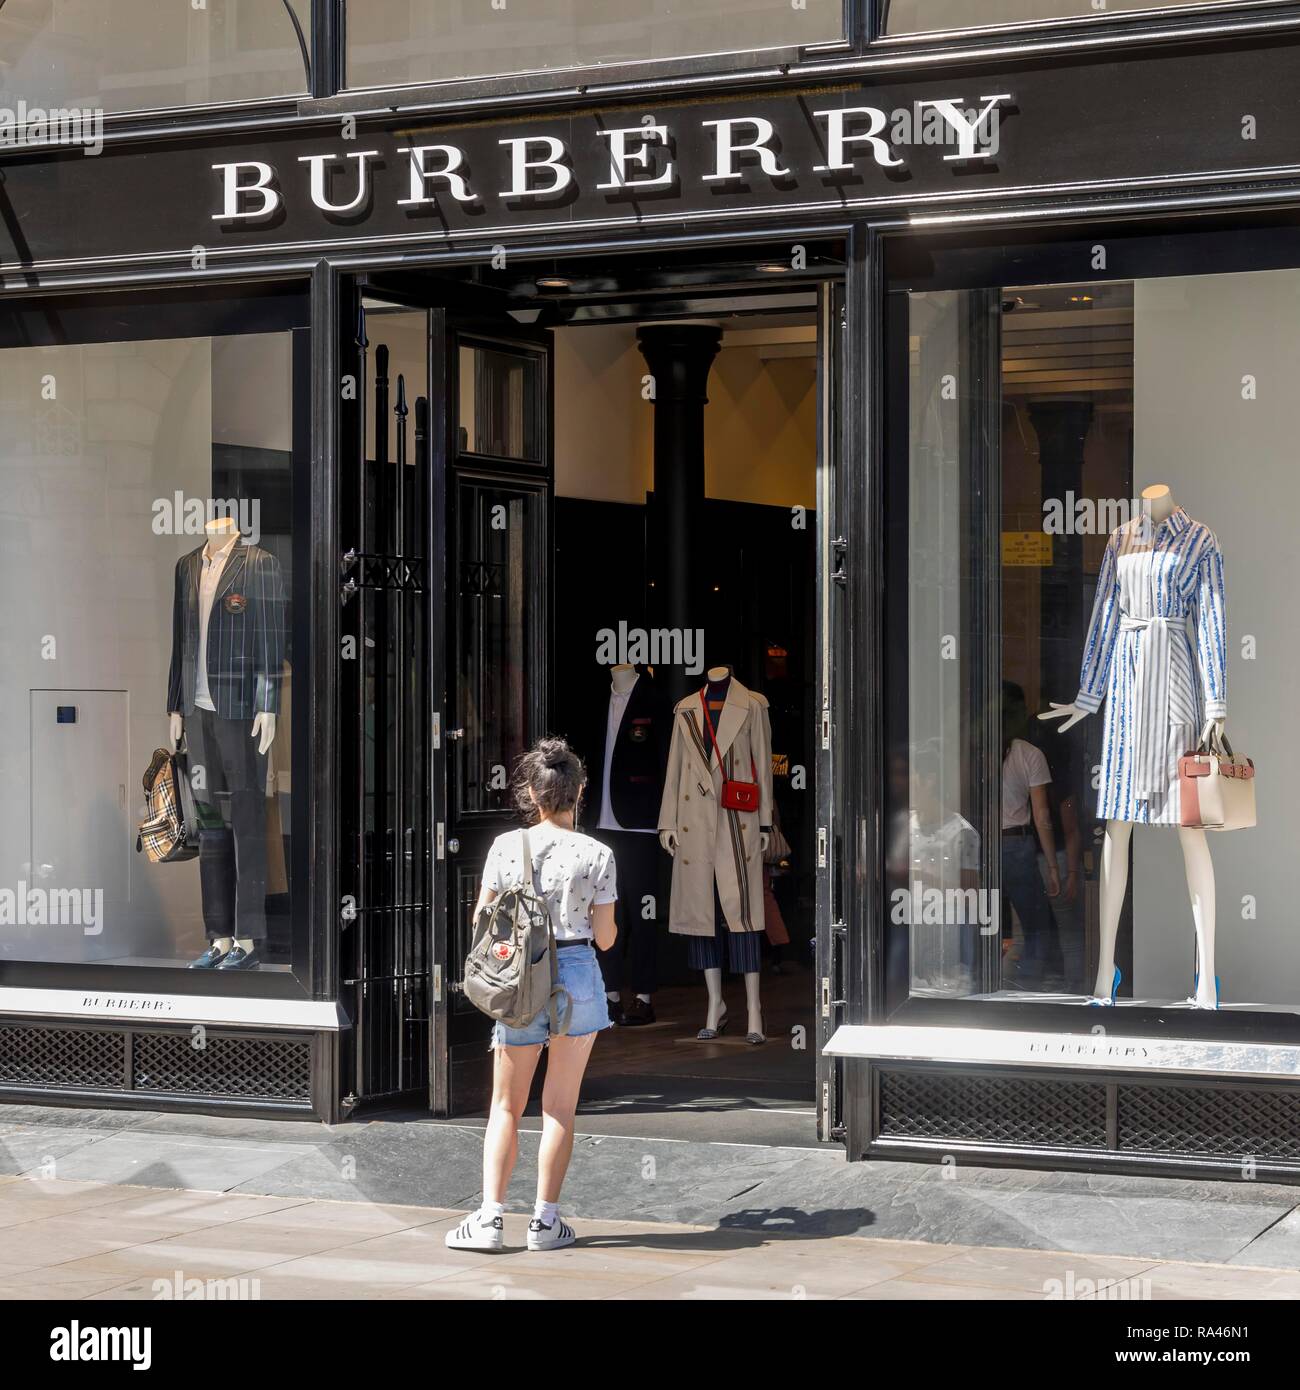 Woman in front of clothing store Burberry, London, United Kingdom Stock Photo